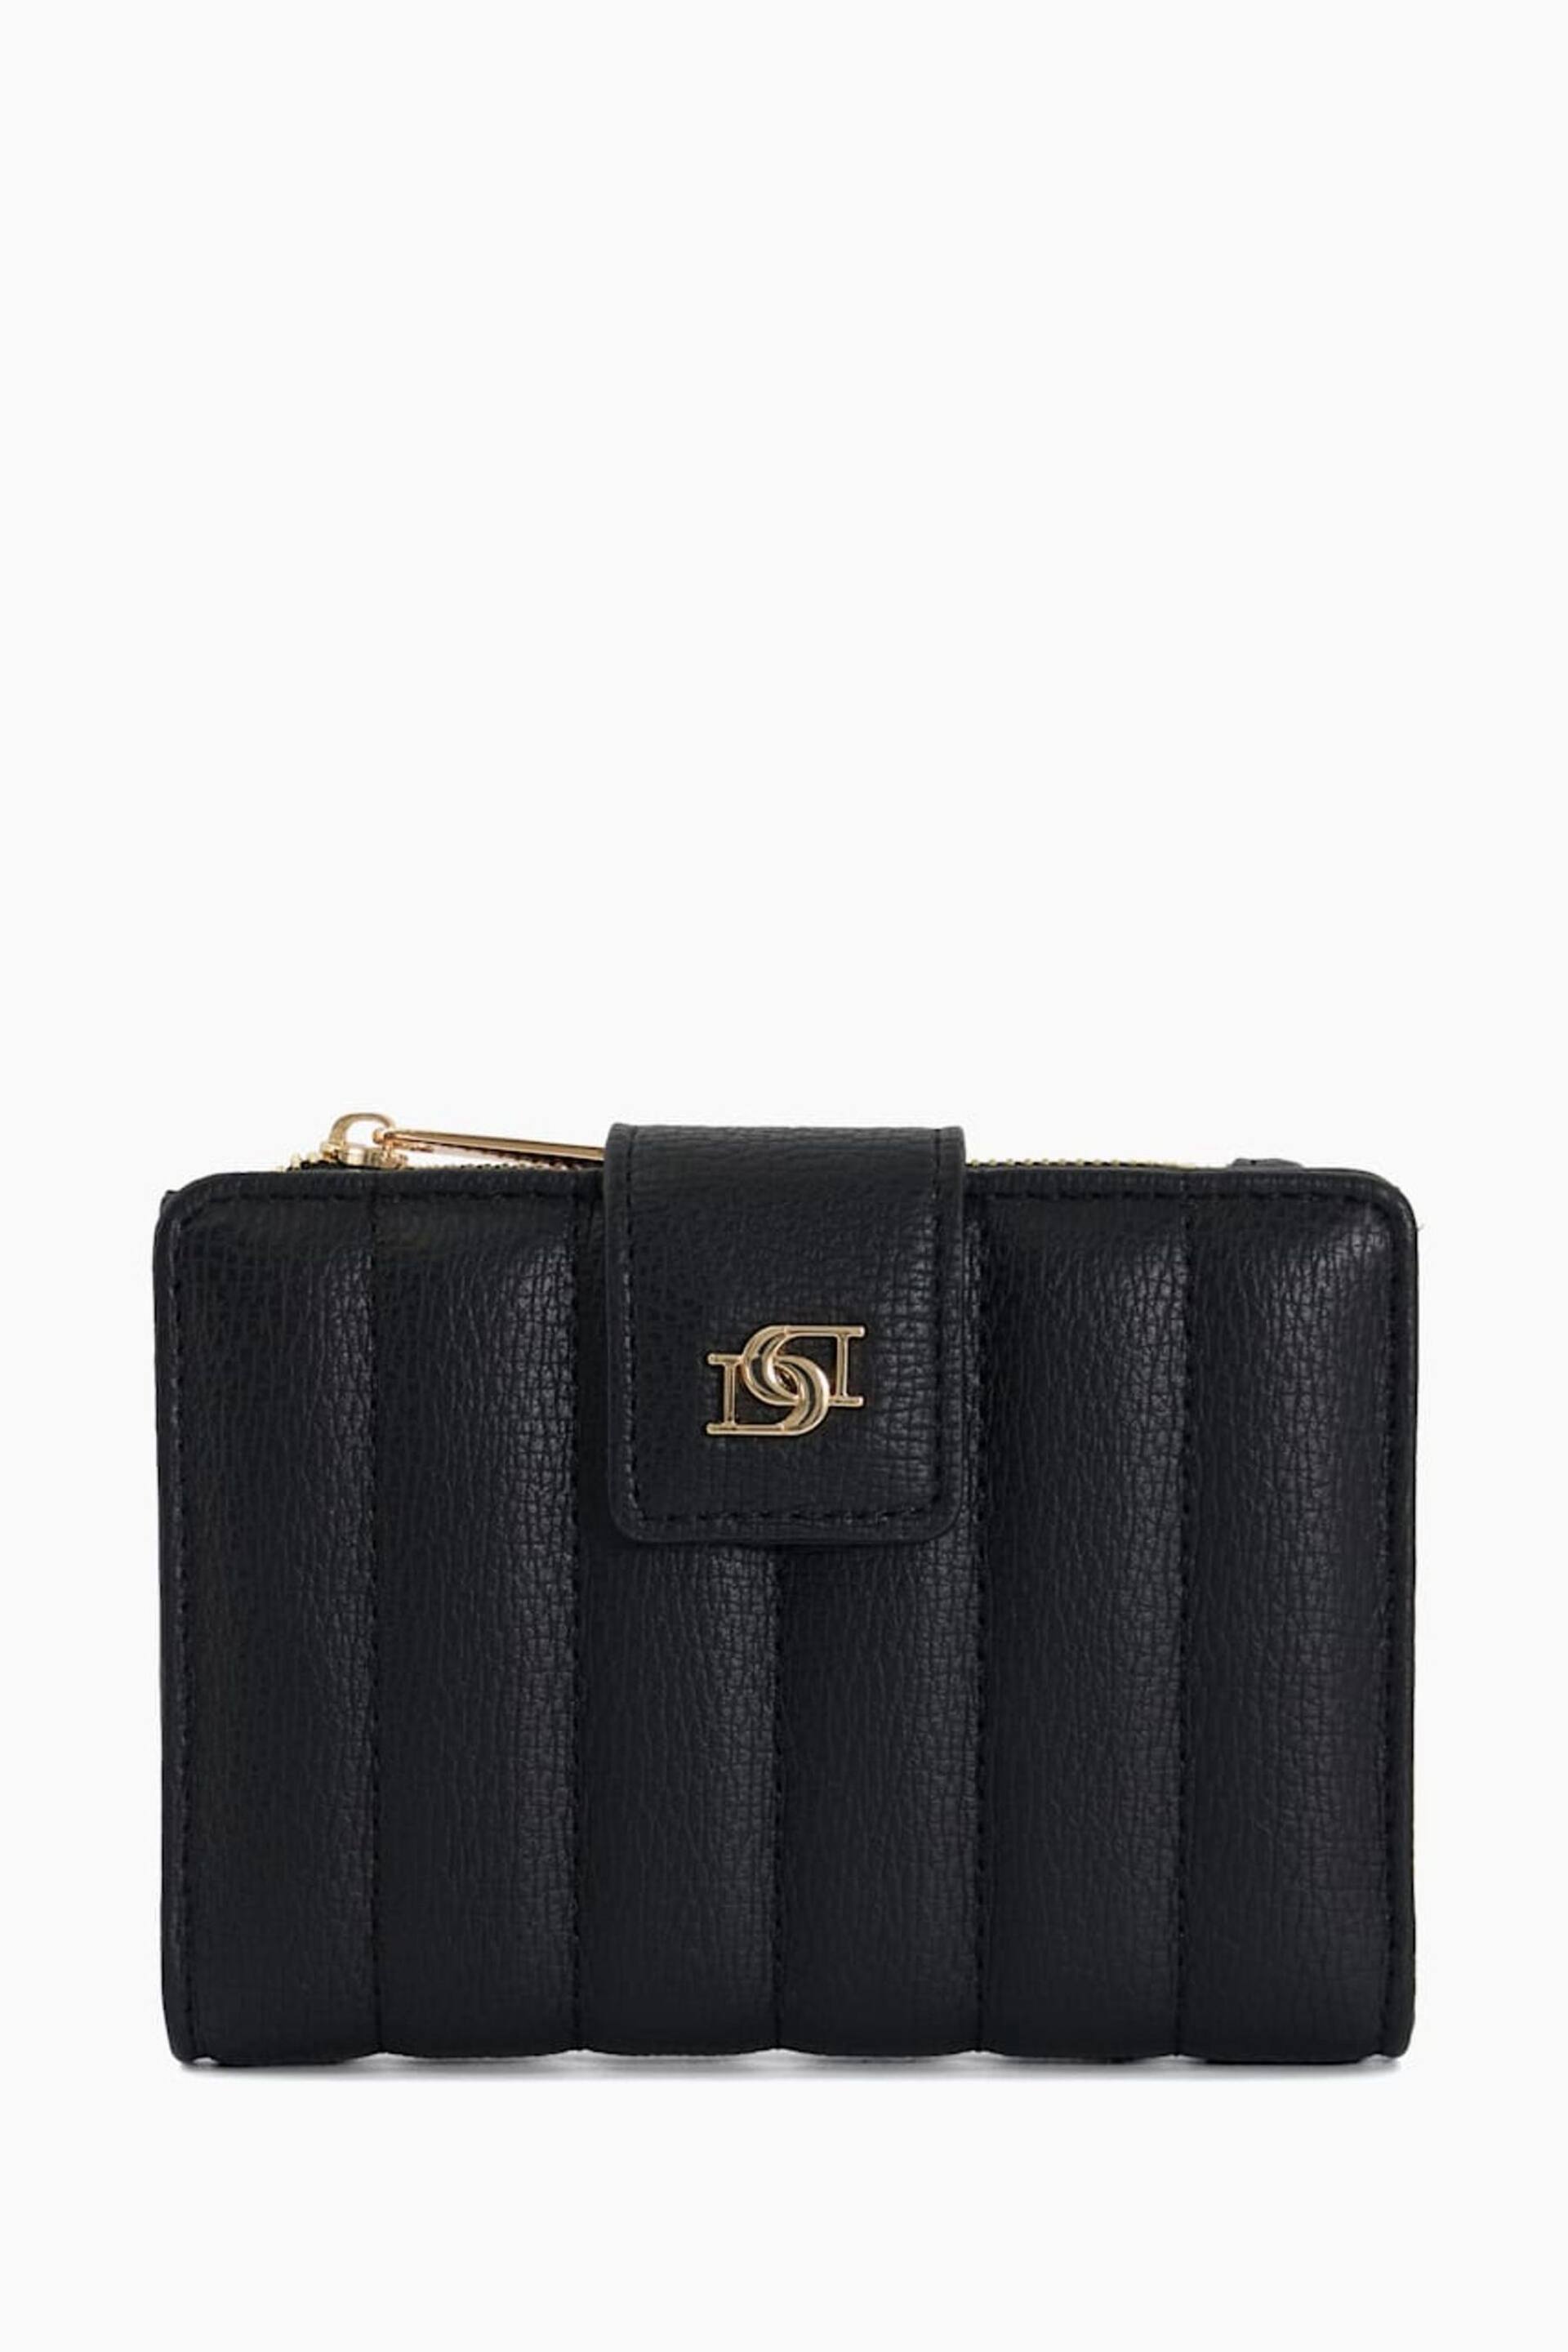 Dune London Black Slim Kinners Quilted Purse - Image 1 of 4